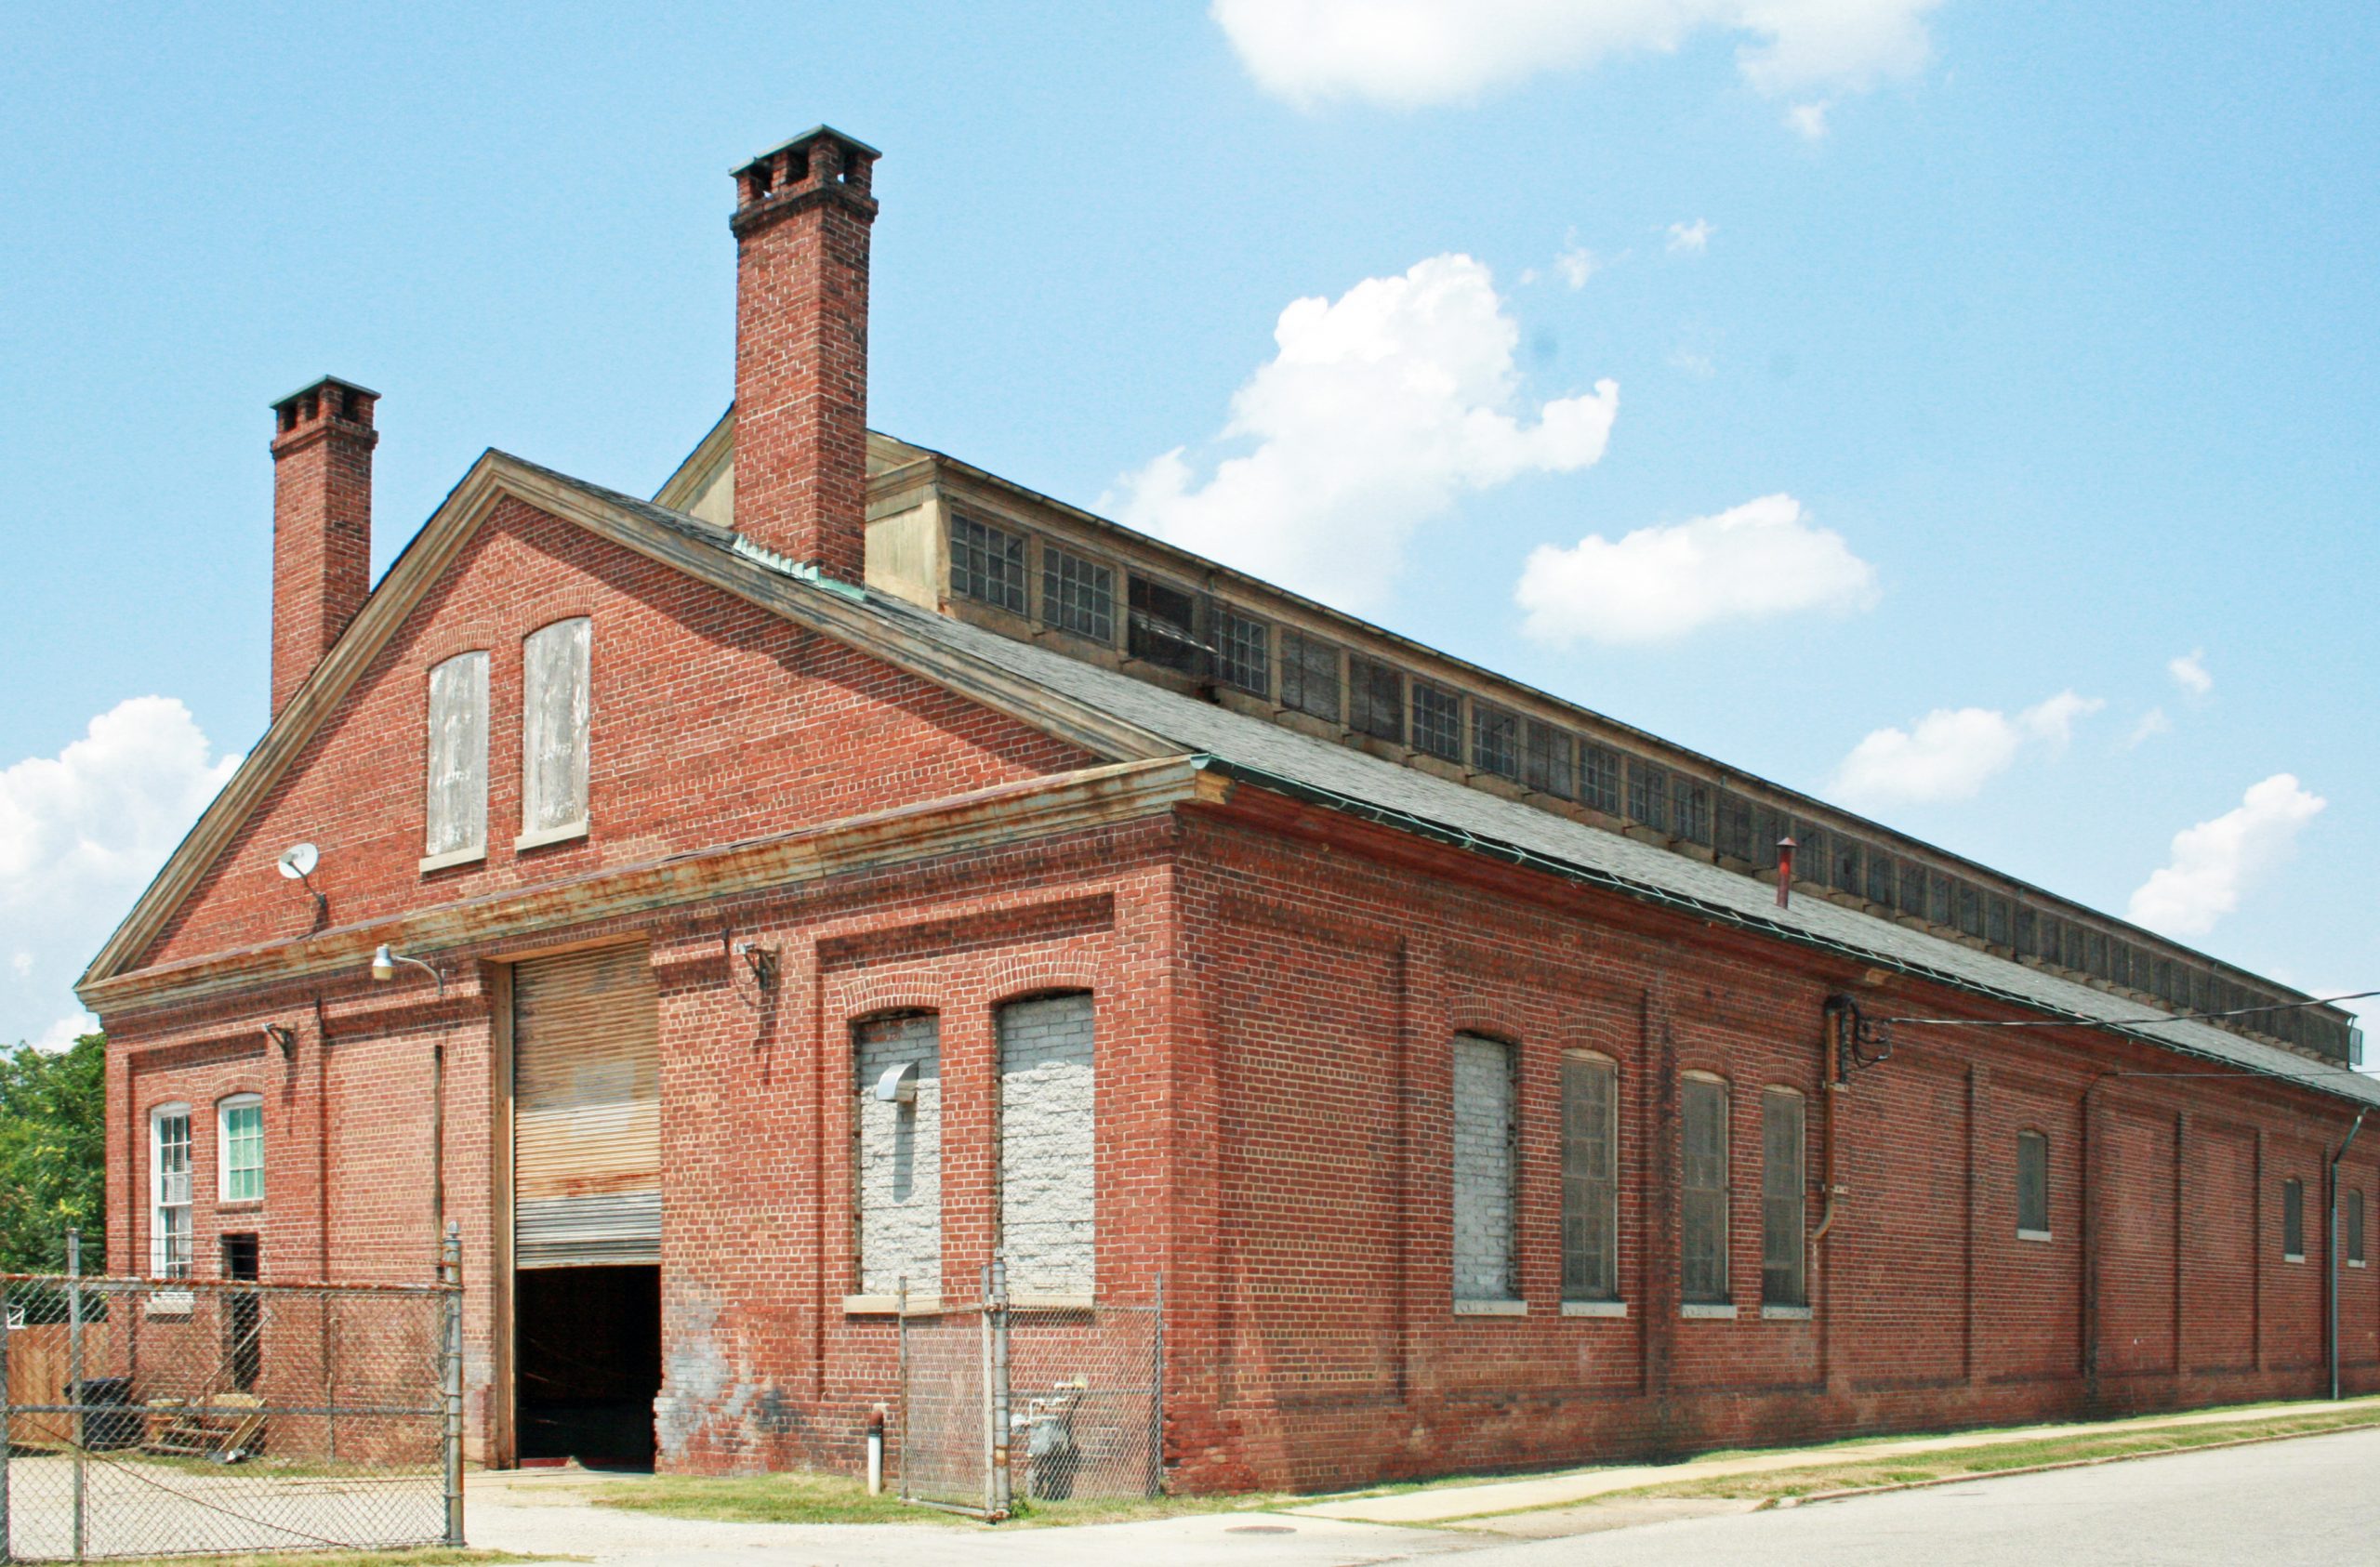 123_5421_South_Chappell_St_Car_Barn_2008_exterior_SW_oblique_VLR_online-scaled